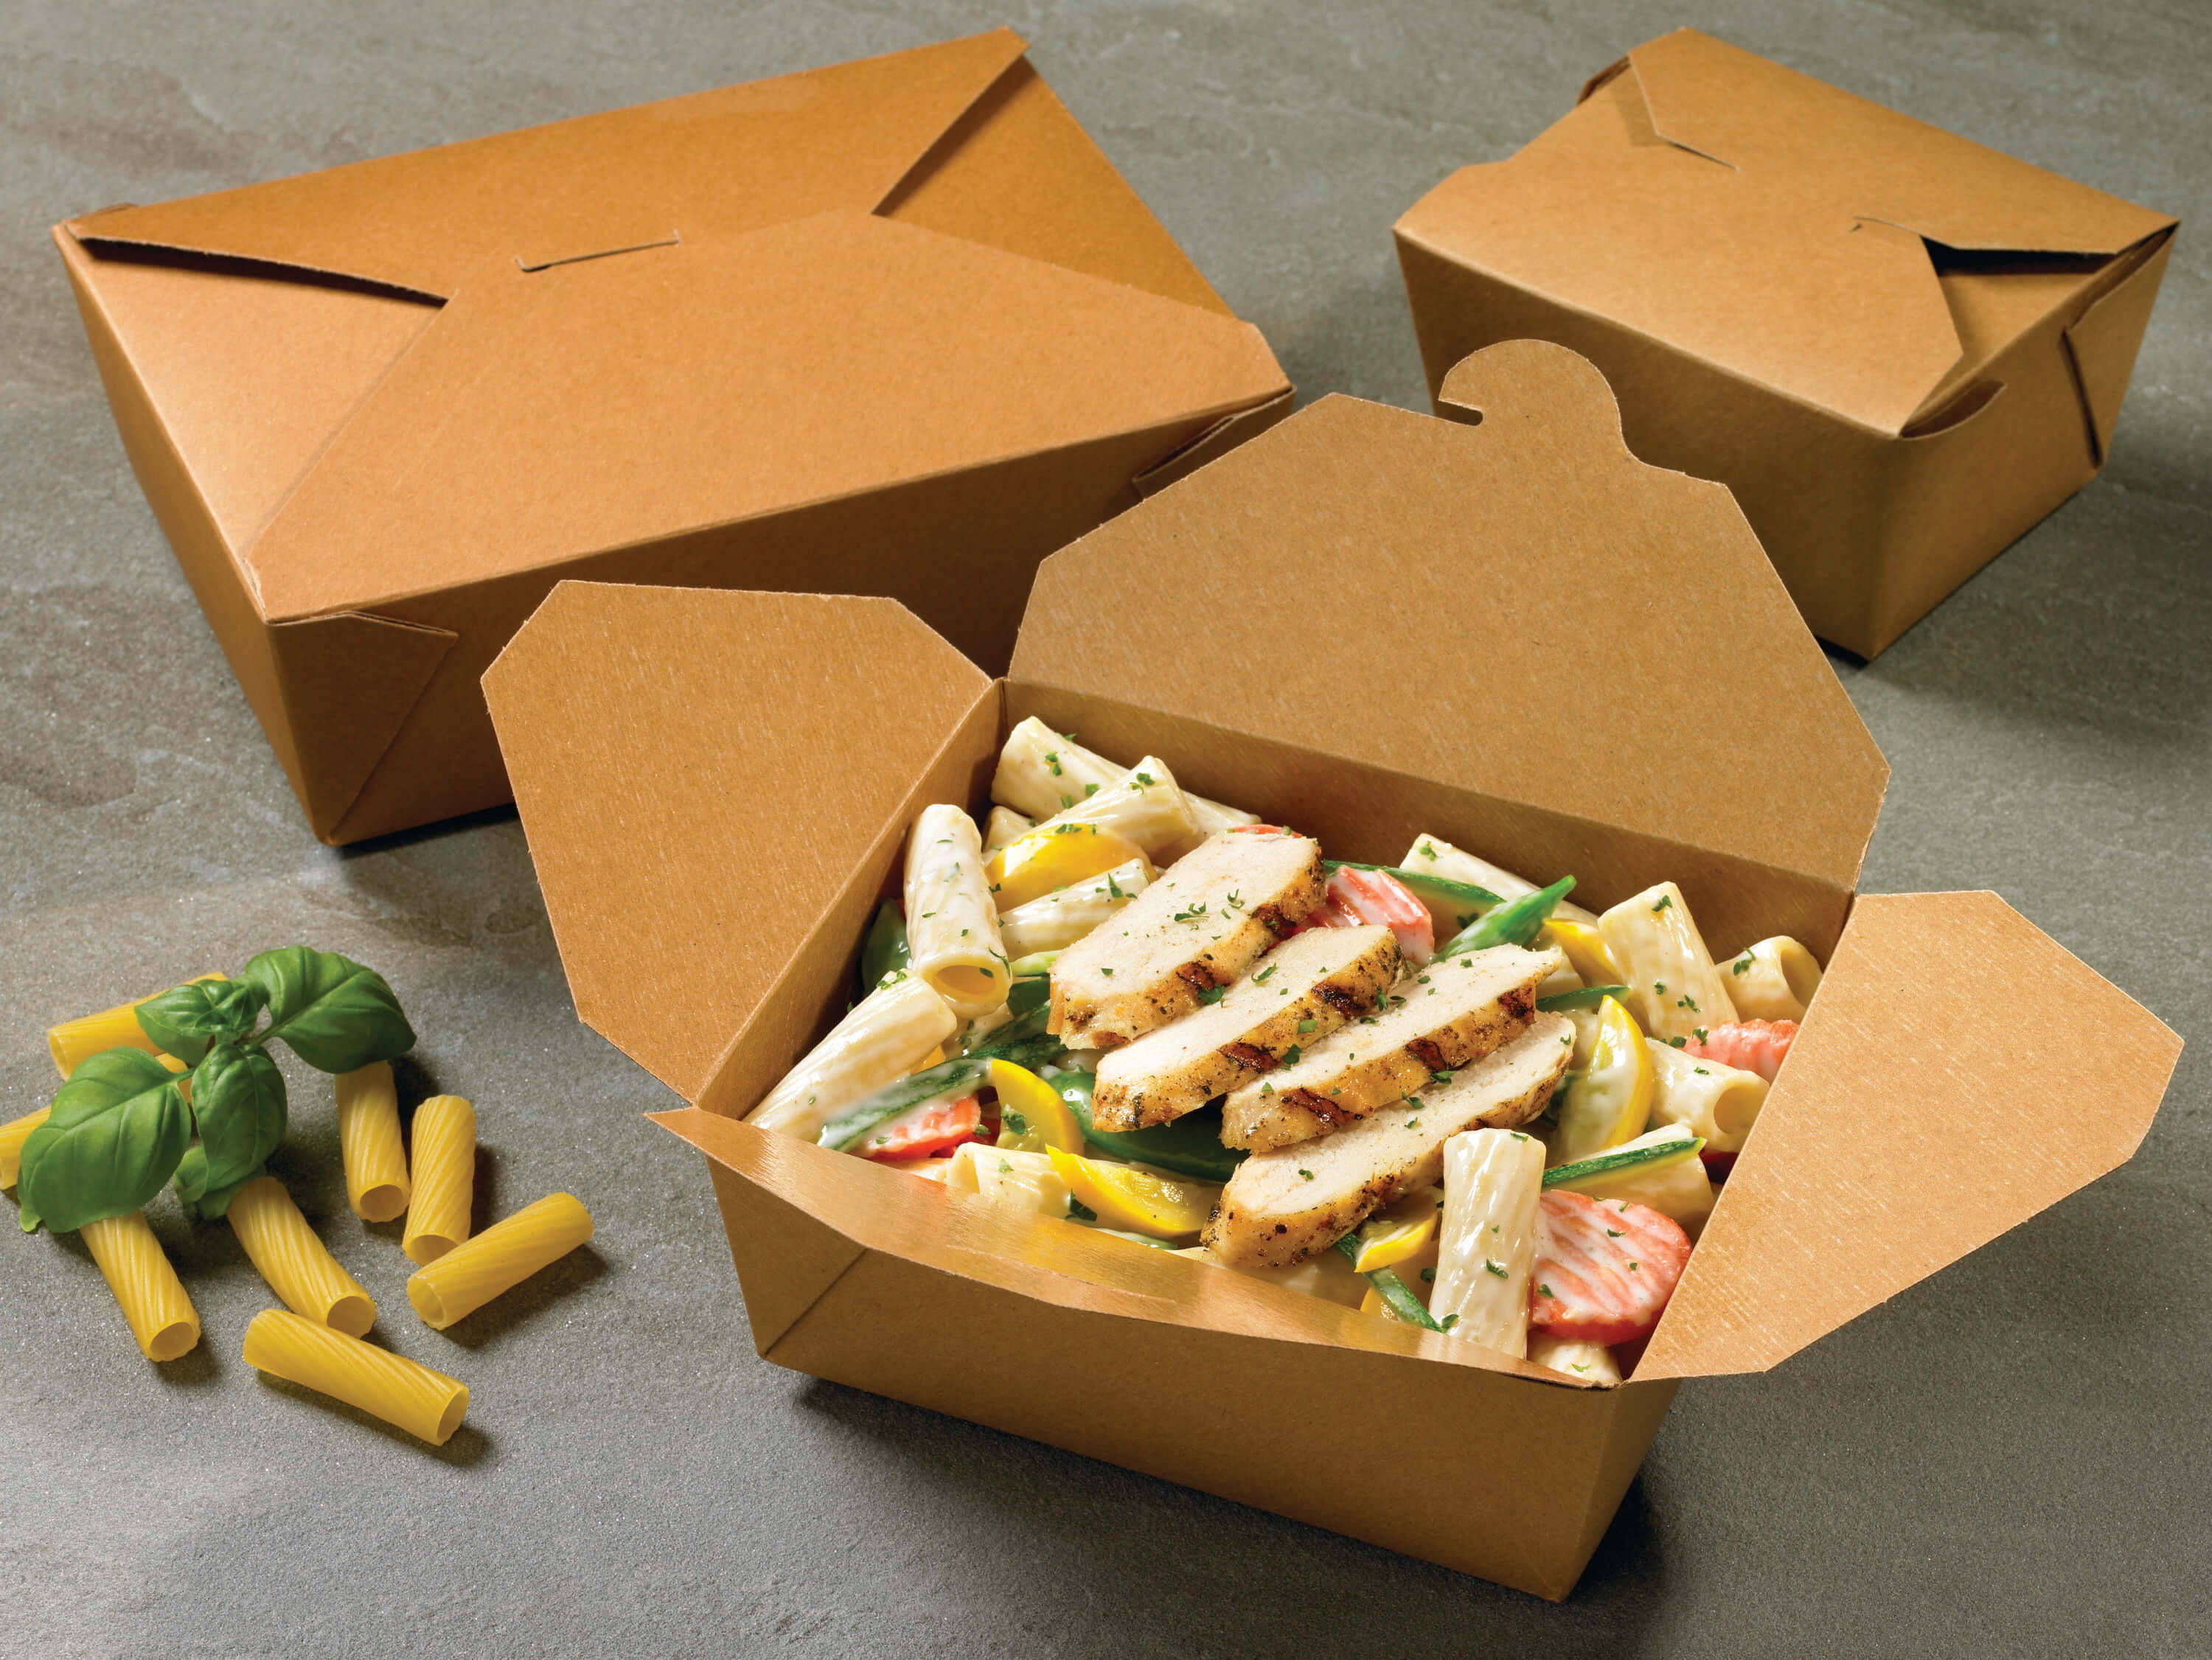 A group shot of Bio-Plus Terra II folding carton containers holding food.